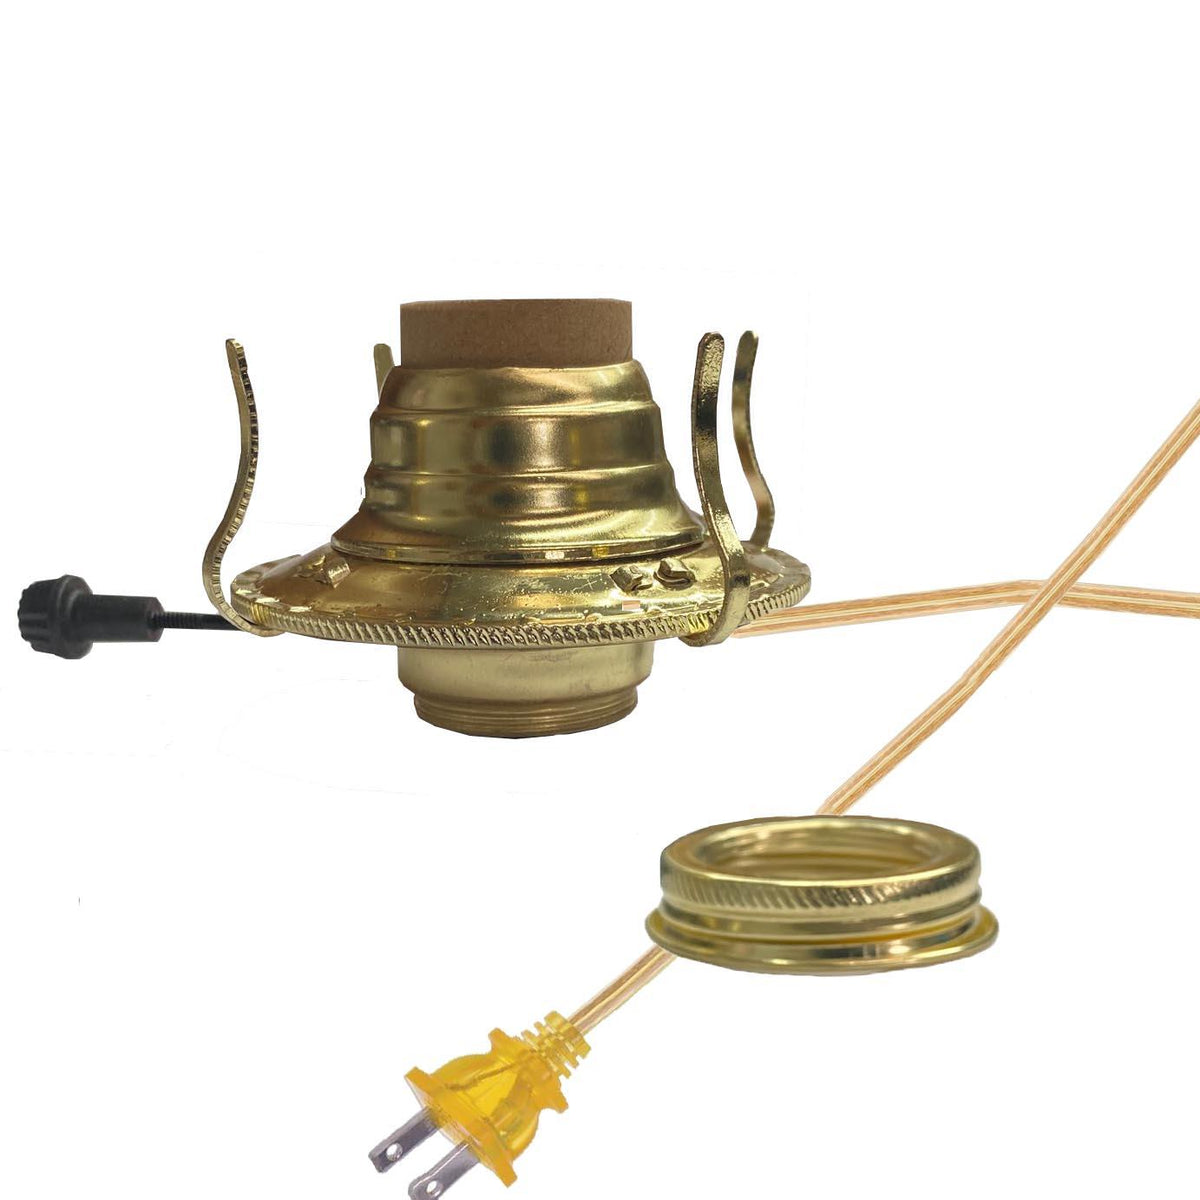 Electric Oil Lamp Burners, Brass Plated #2-Gold - Paxton Hardware ltd